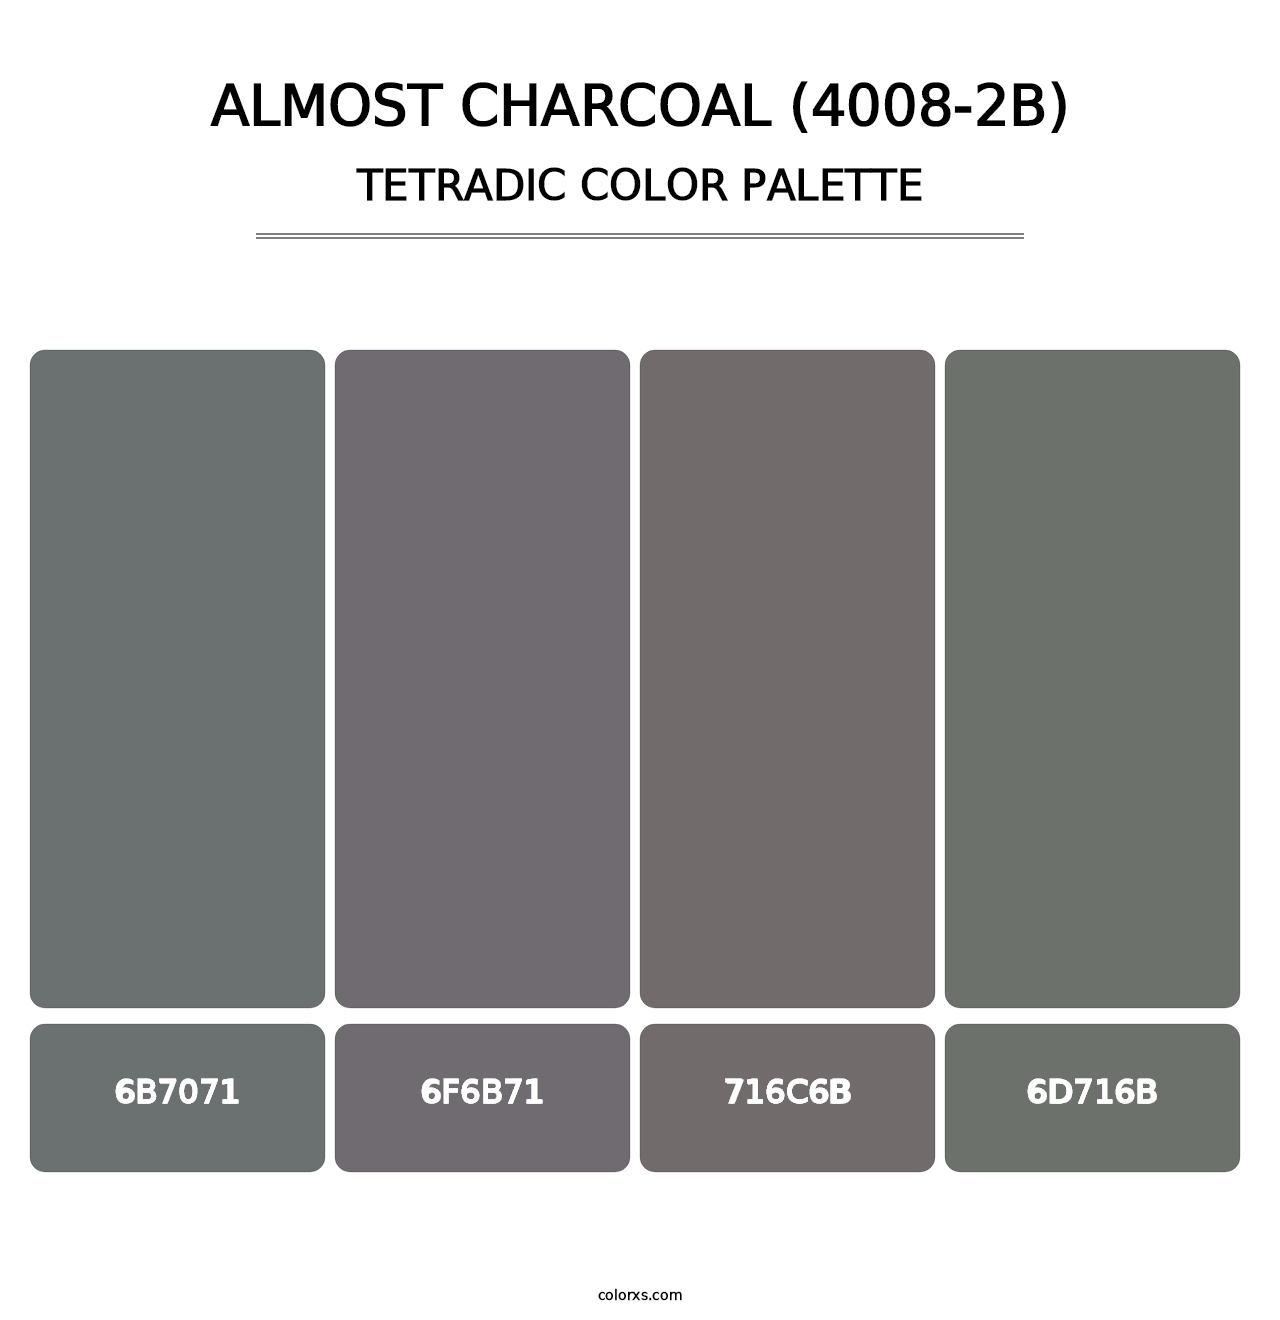 Almost Charcoal (4008-2B) - Tetradic Color Palette